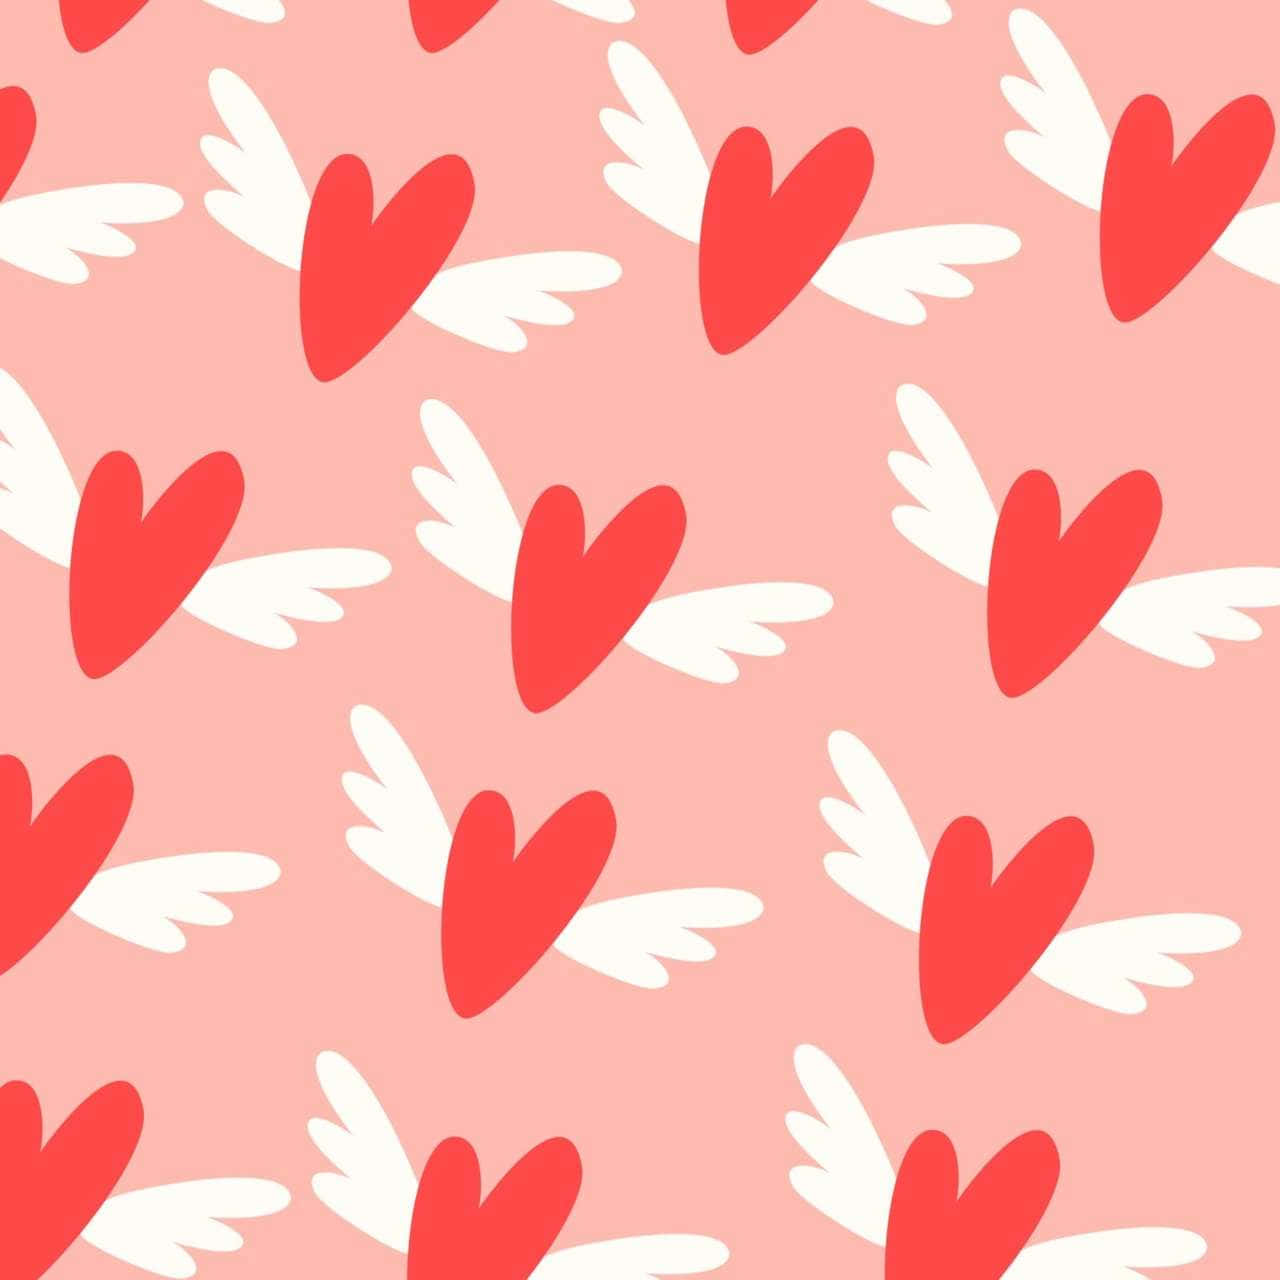 Lovecore Winged Hearts Pattern Background